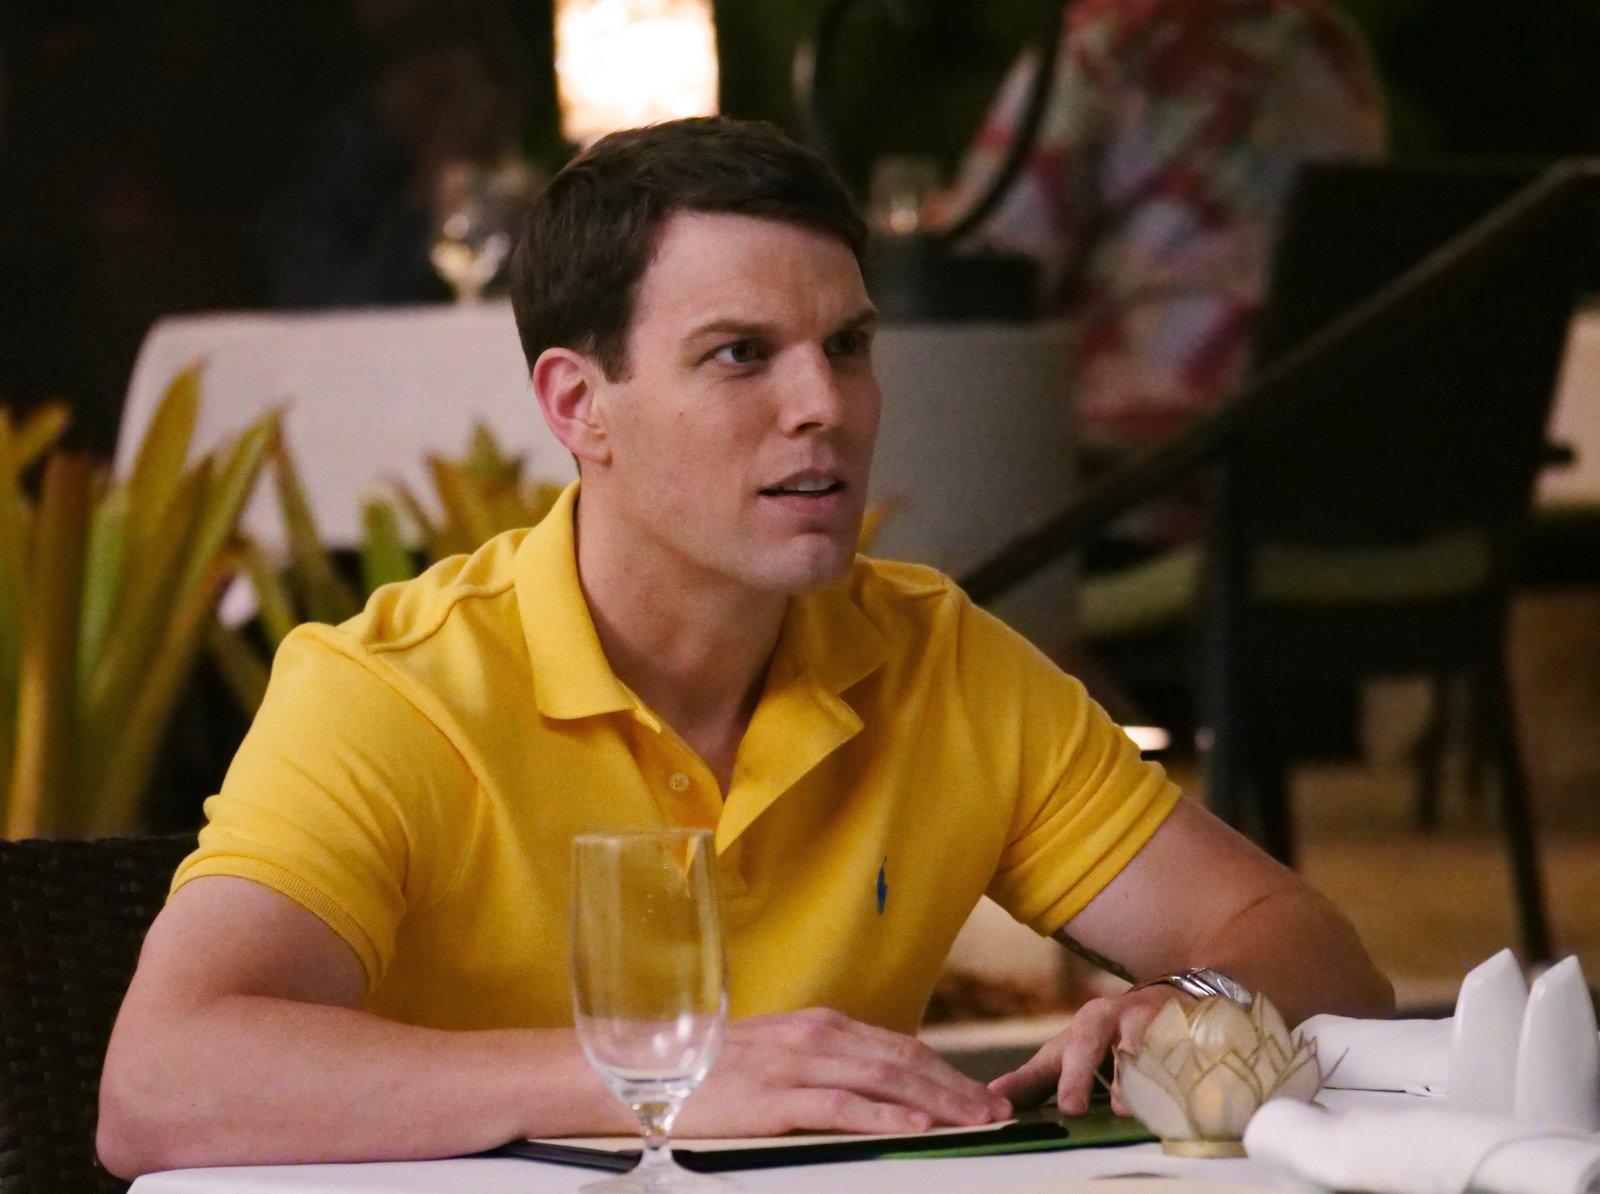 Jake Lacy as Shane in HBO's 'The White Lotus' finale. He's wearing a yellow polo shirt and leaning on a dinner table, which has a white table cloth and is set with utensils and glasses.